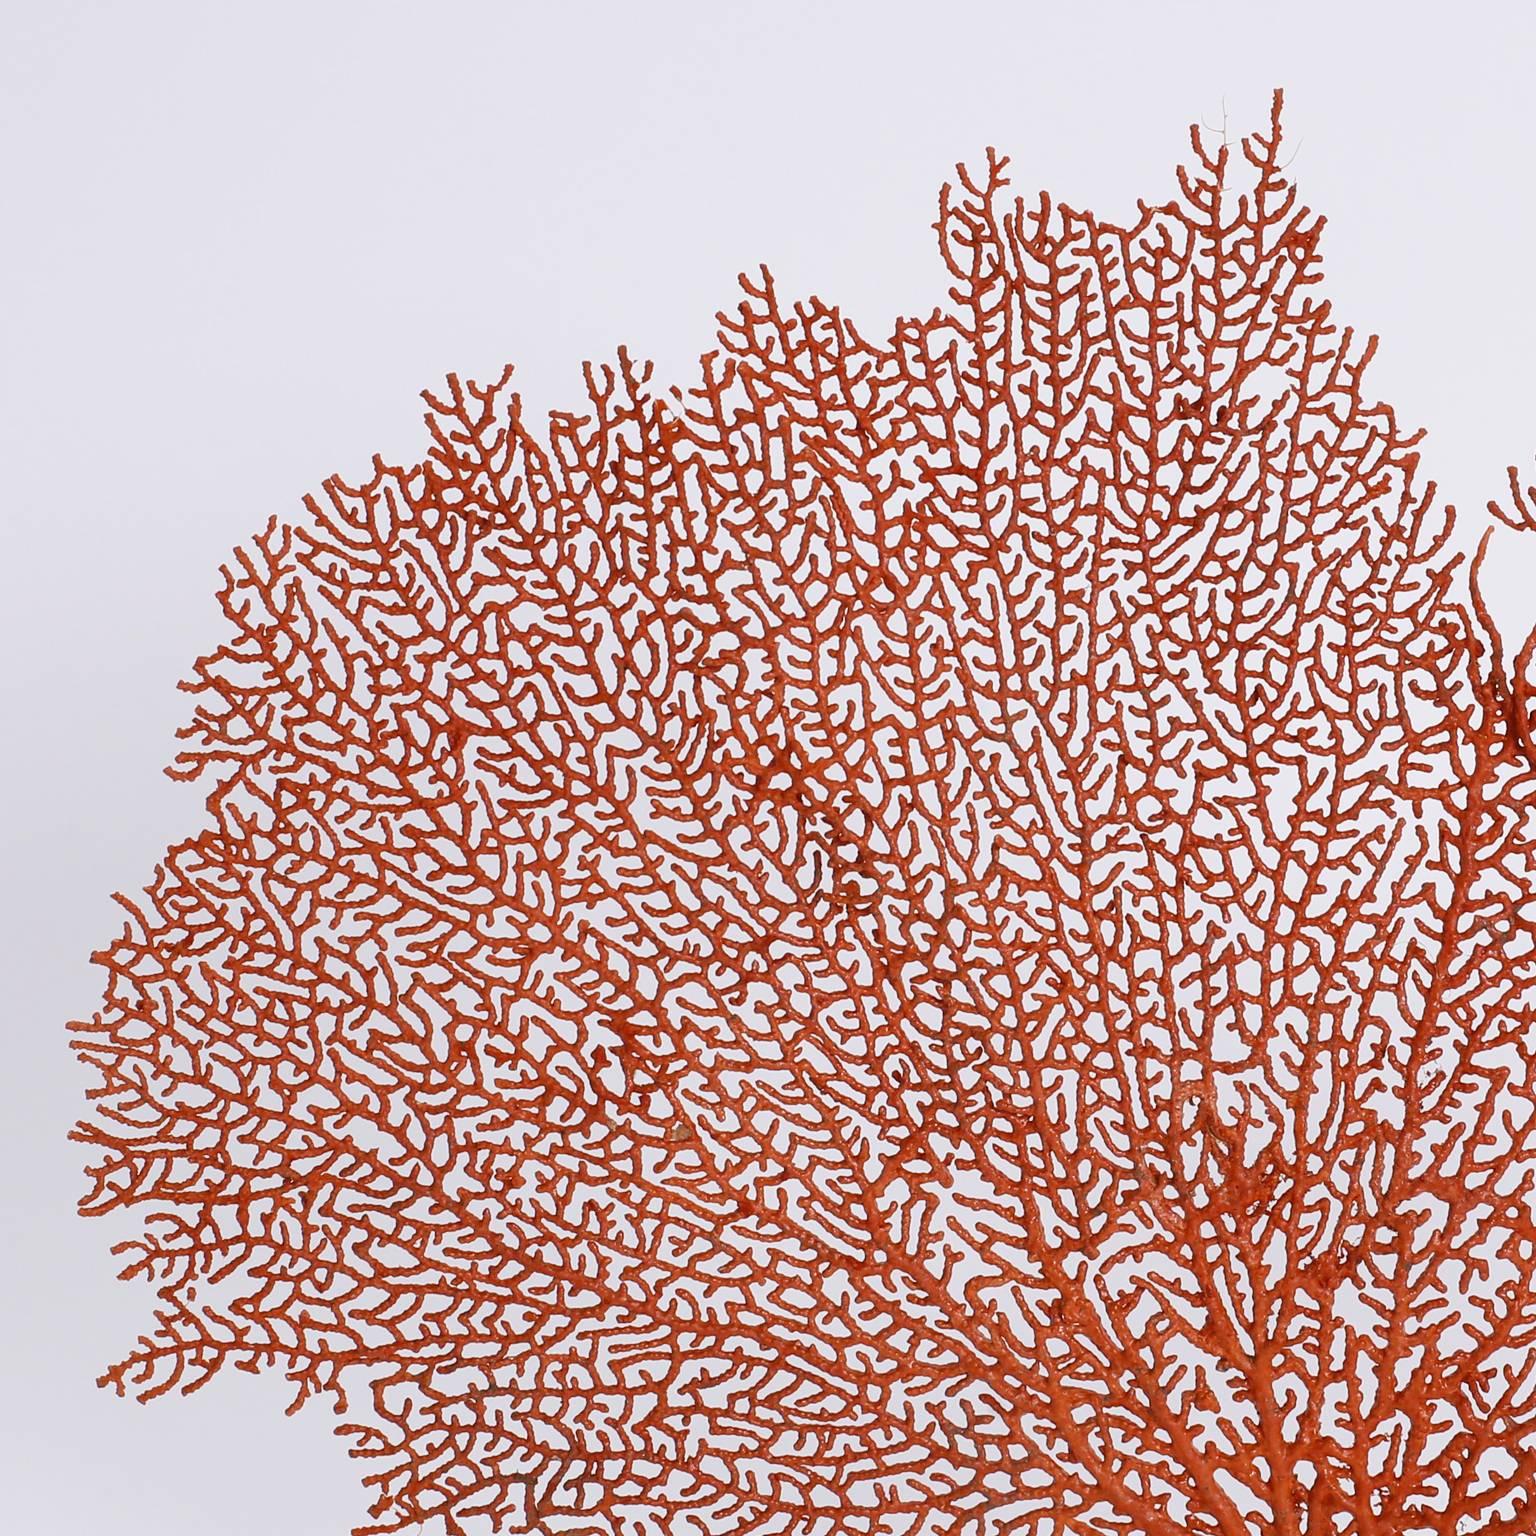 Authentic red sea fan with its glorious form and vibrant tropical color. Presented on a custom Lucite base.